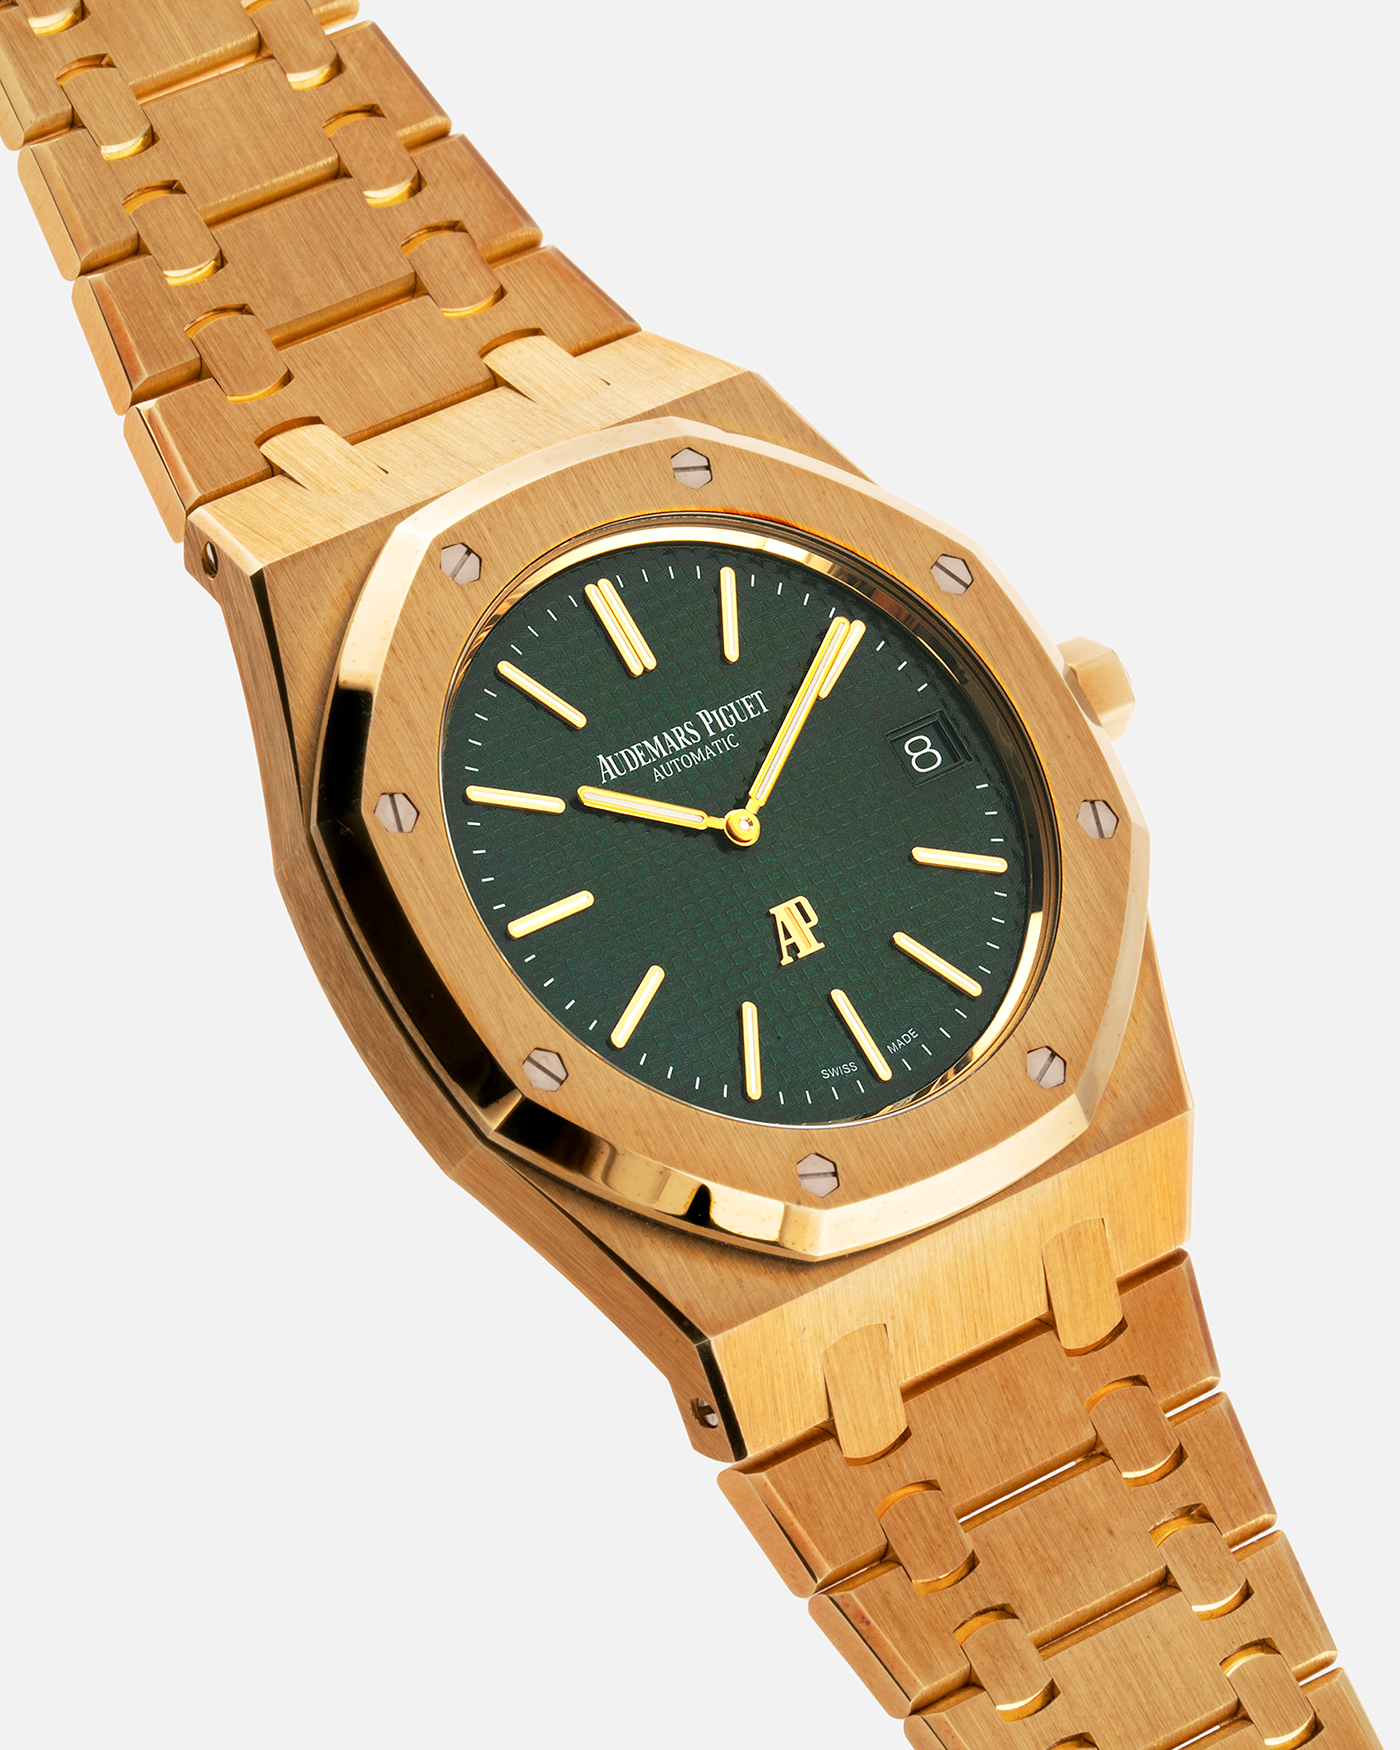 Brand: Audemars Piguet Year: 2015 Model: Royal Oak The Hour Glass Edition Reference Number: 15205 / 15202 Material: 18ct Yellow Gold Movement: Cal 2121 Case Diameter: 39mm Bracelet: Audemars Piguet Integrated 18ct Yellow Gold Bracelet